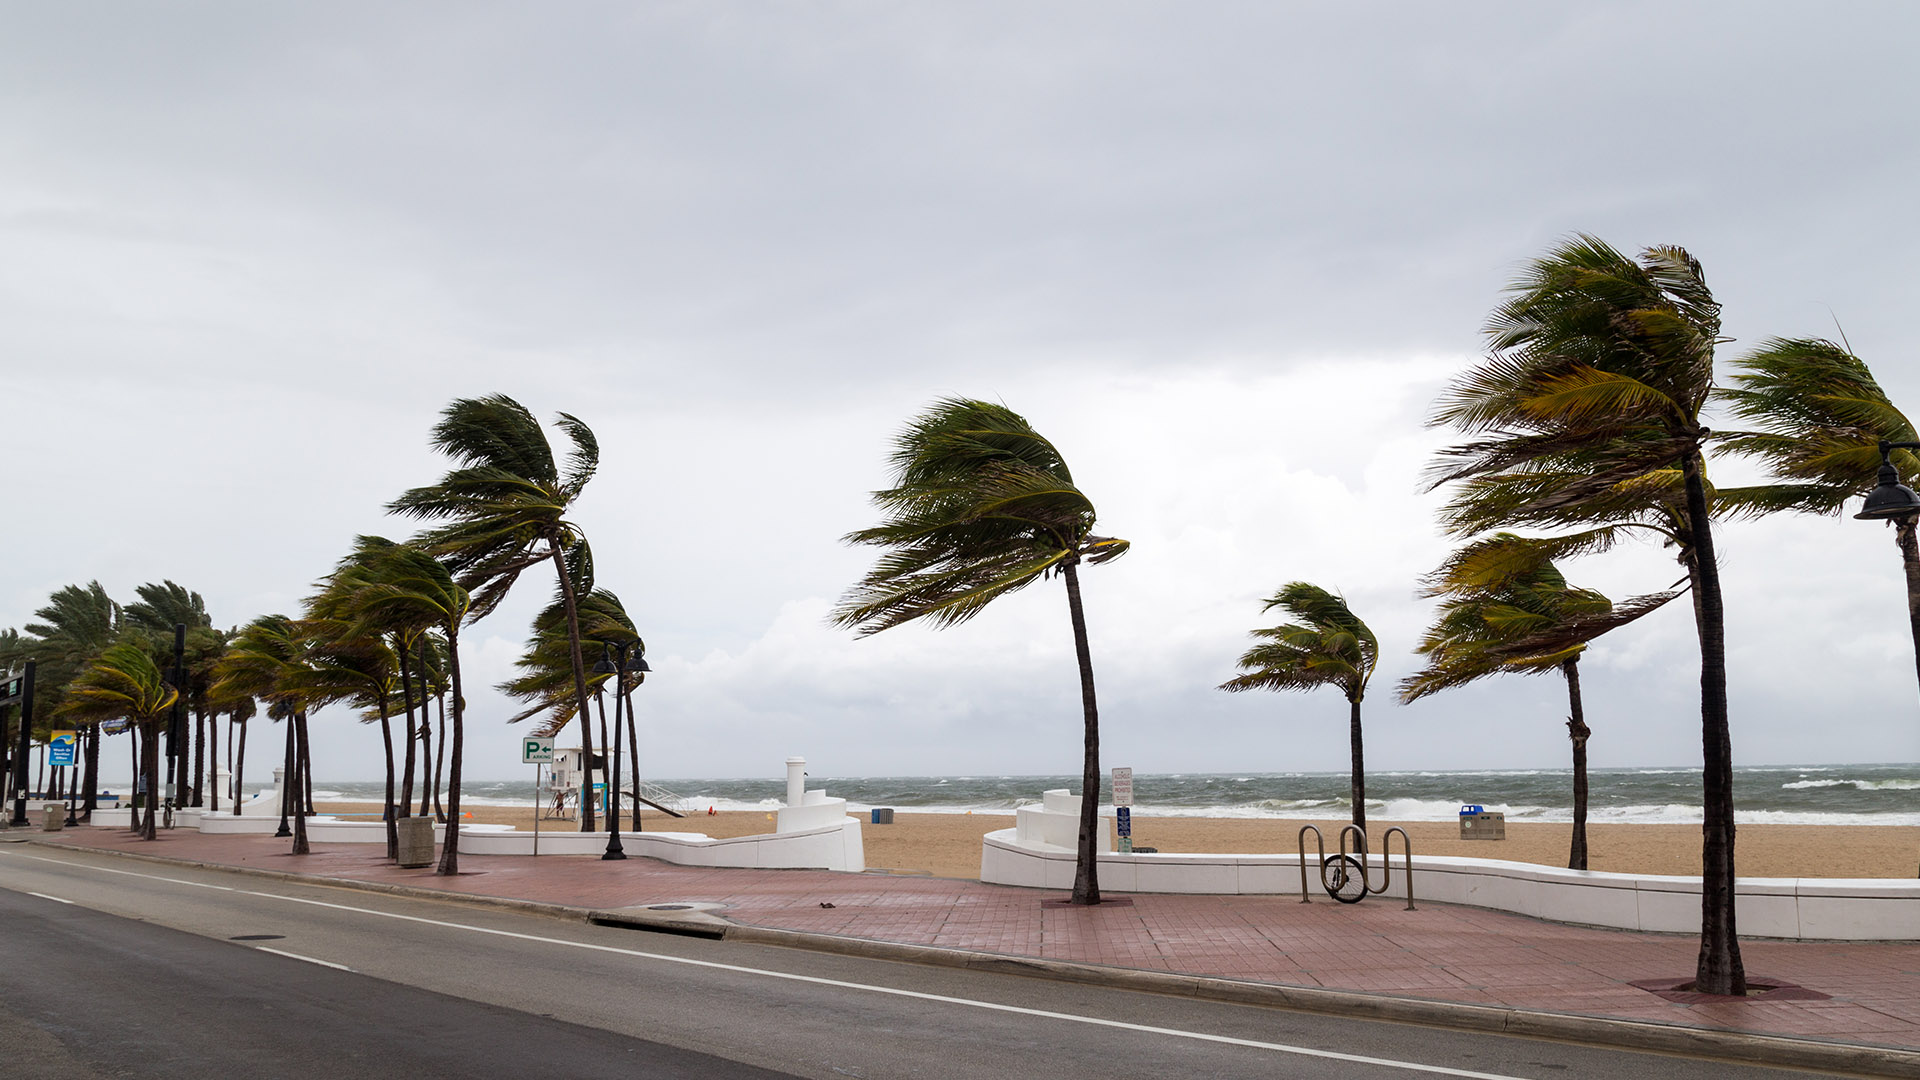 El Niño is Fueling Winter Storms that are Impacting Florida